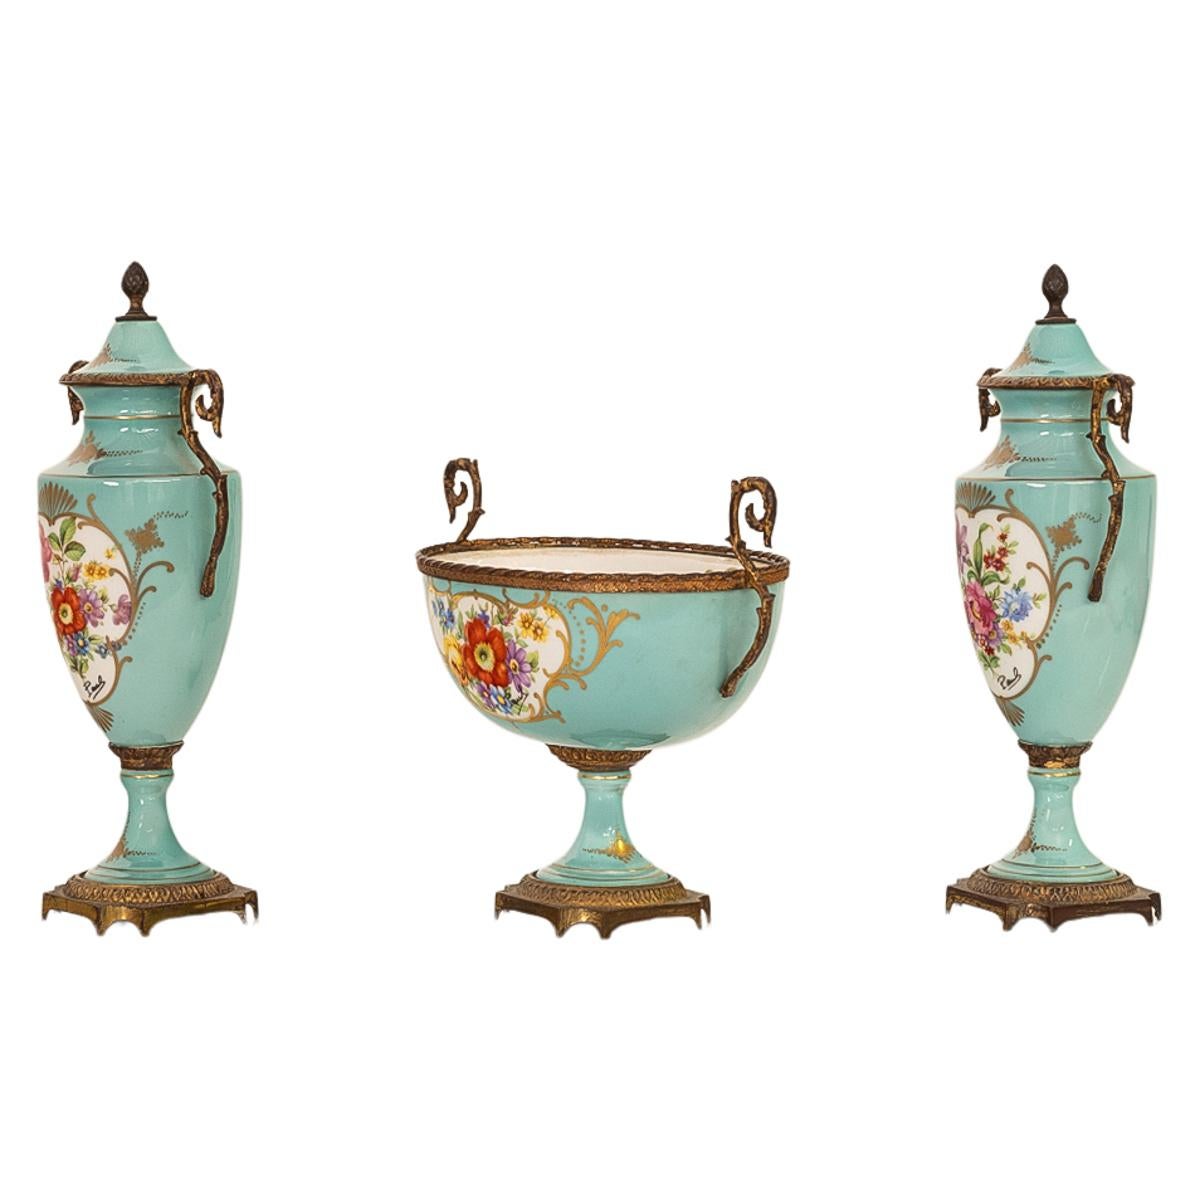 Antique French Pale Blue Sevres Paris Porcelain Ormolu Vase Coupe Garniture 1915 In Good Condition For Sale In Portland, OR